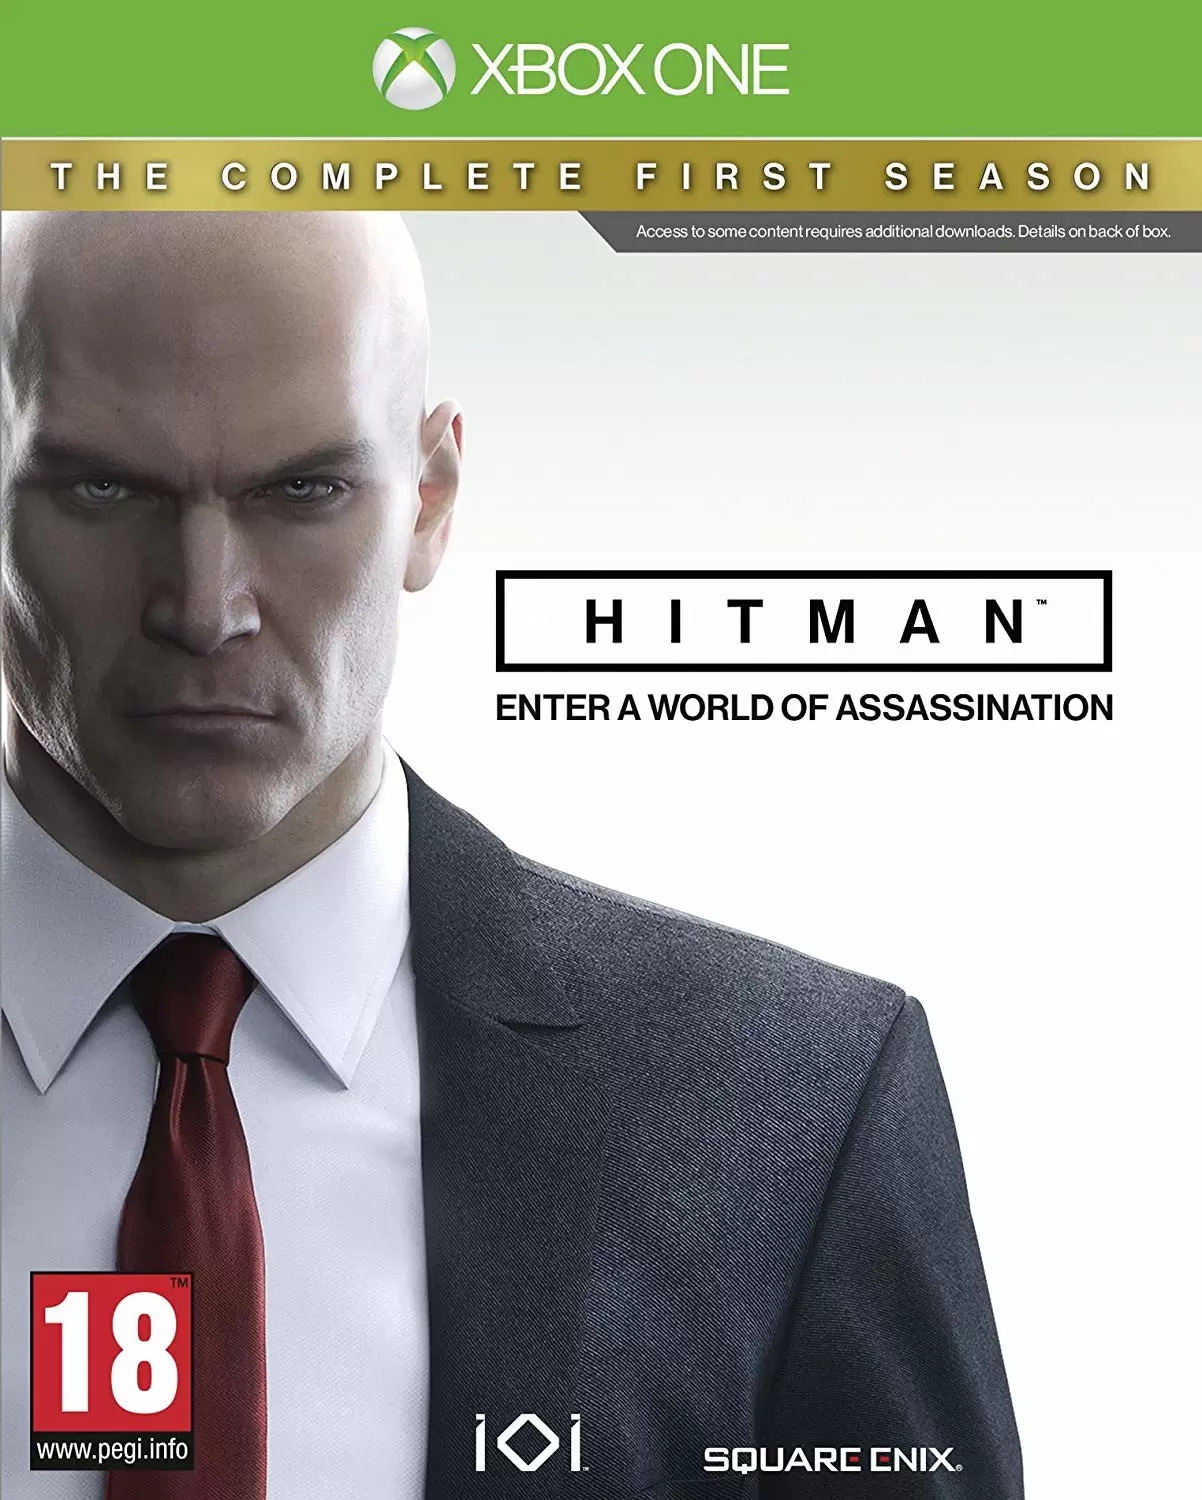 Jeux XBOX One - Hitman : The complete First Season